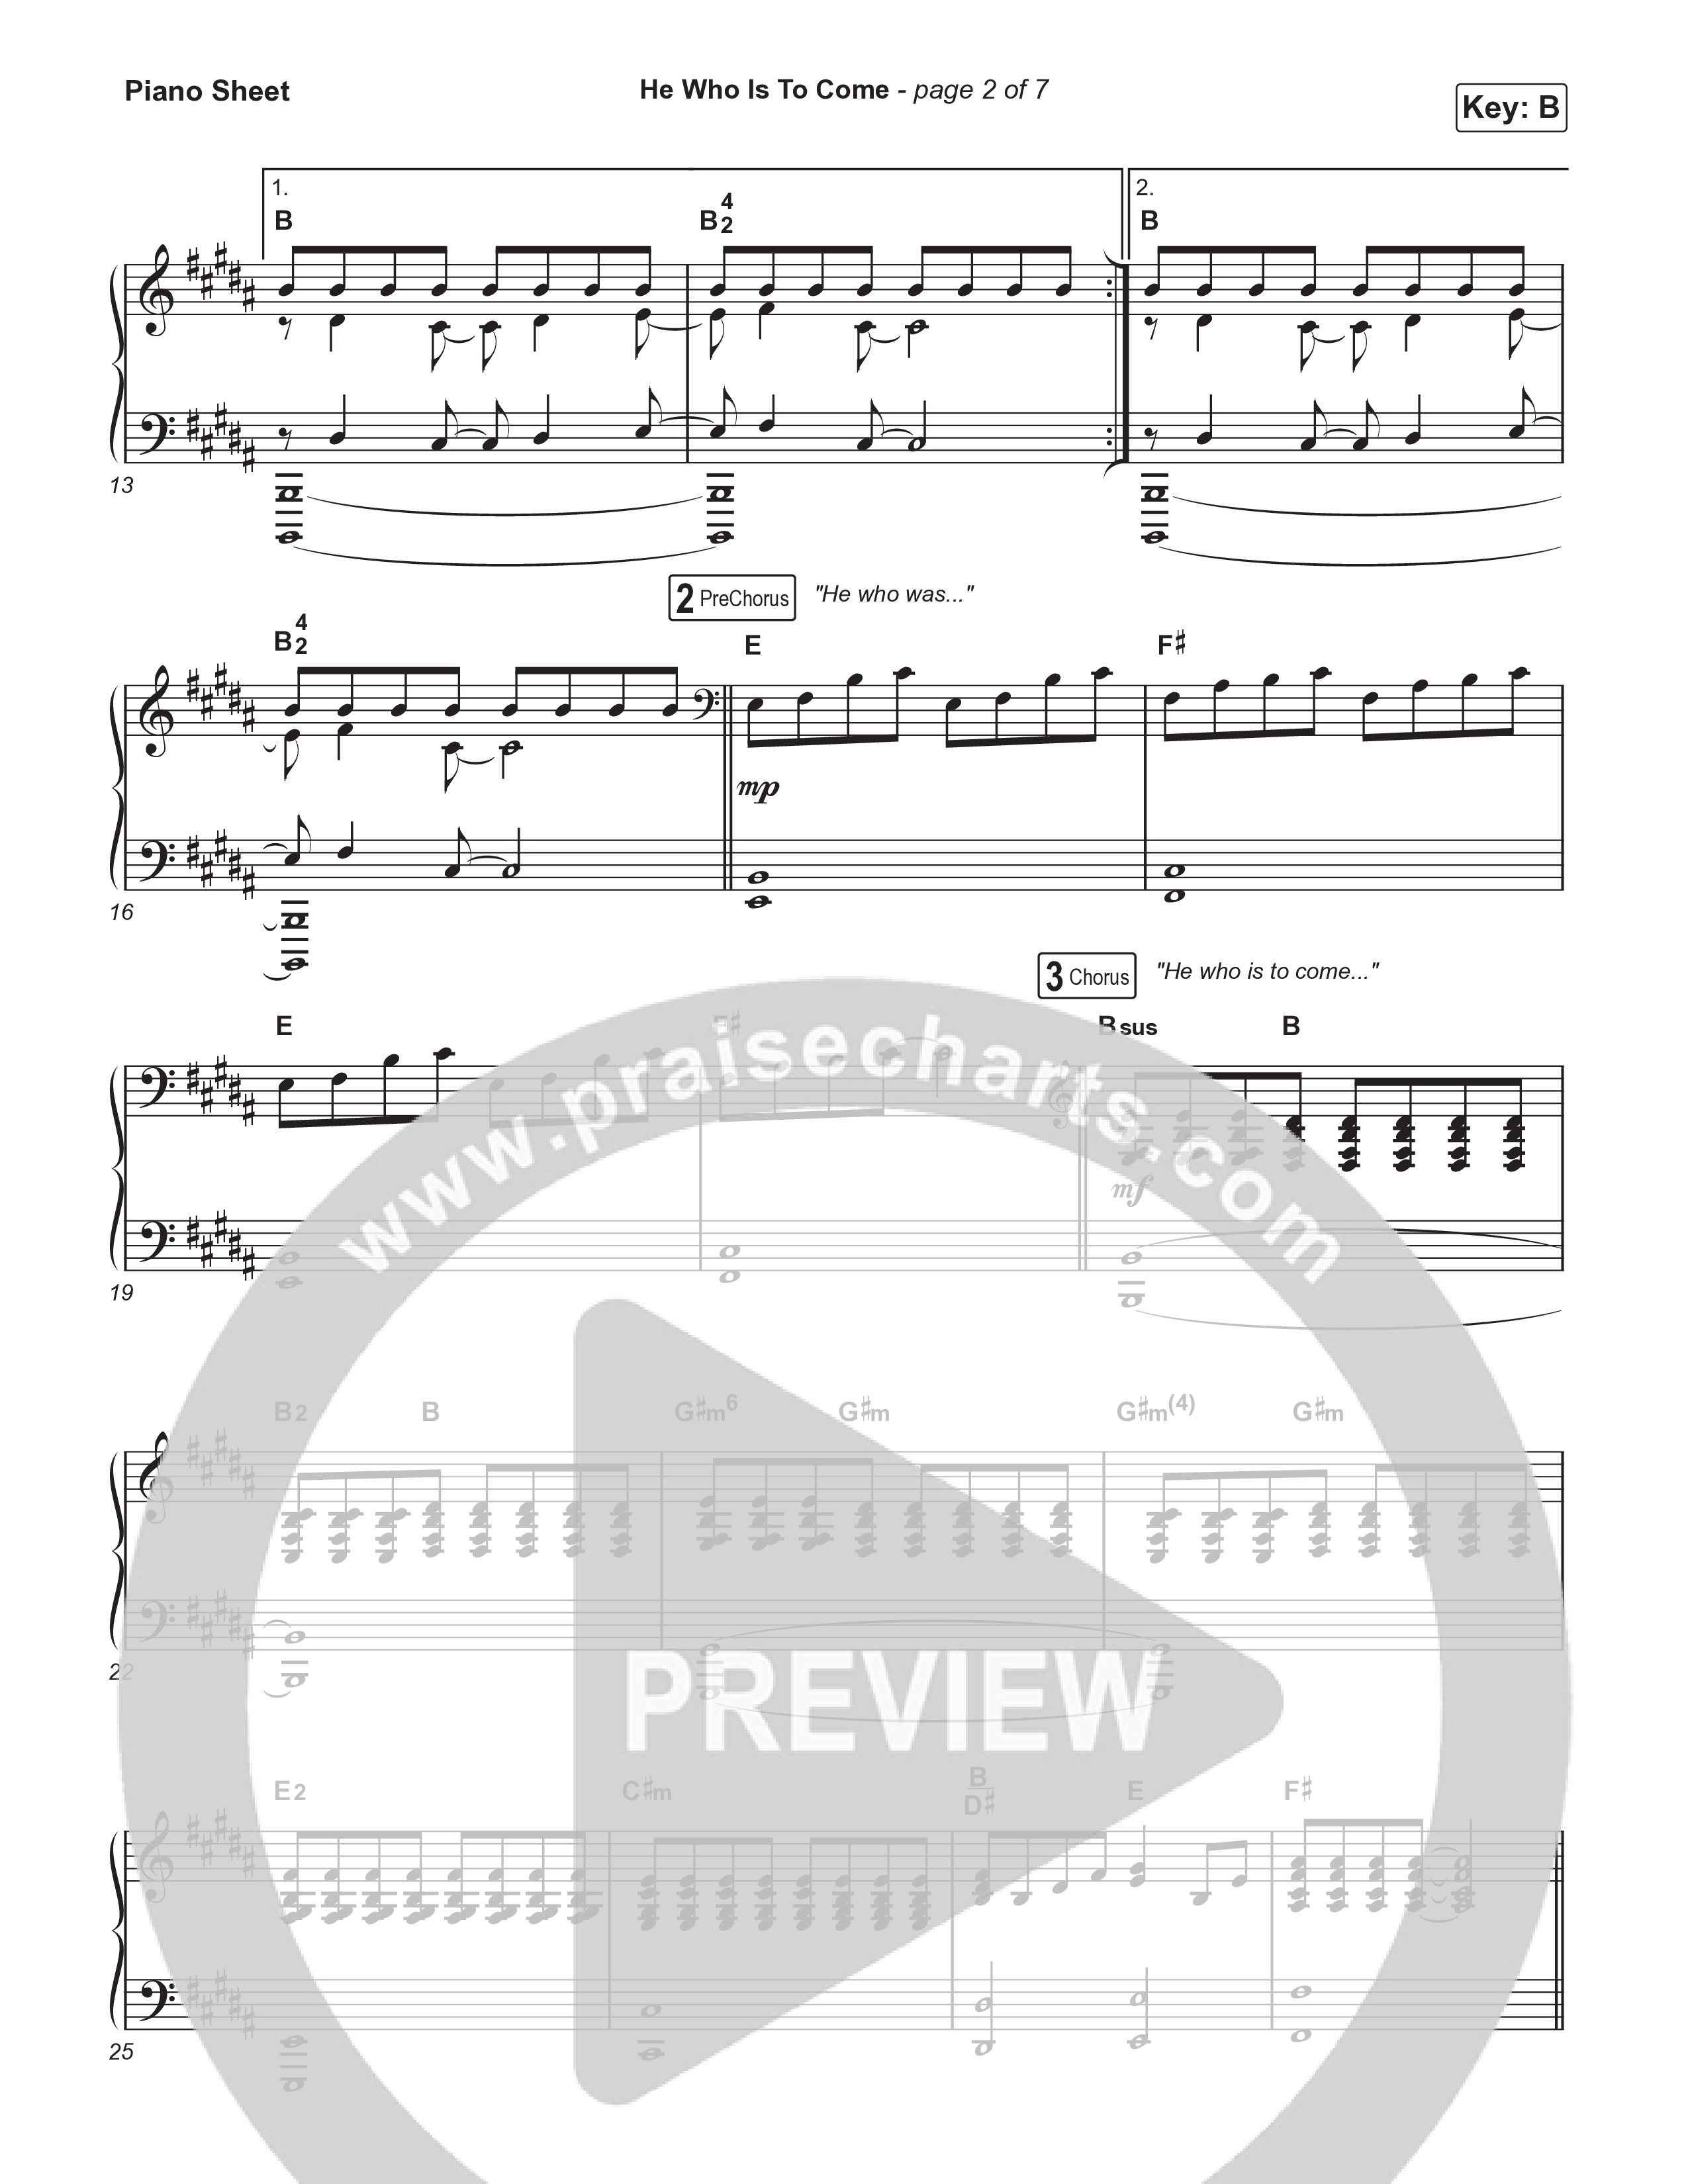 He Who Is To Come (Choral Anthem SATB) Piano Sheet (Passion / Cody Carnes / Kristian Stanfill / Arr. Luke Gambill)